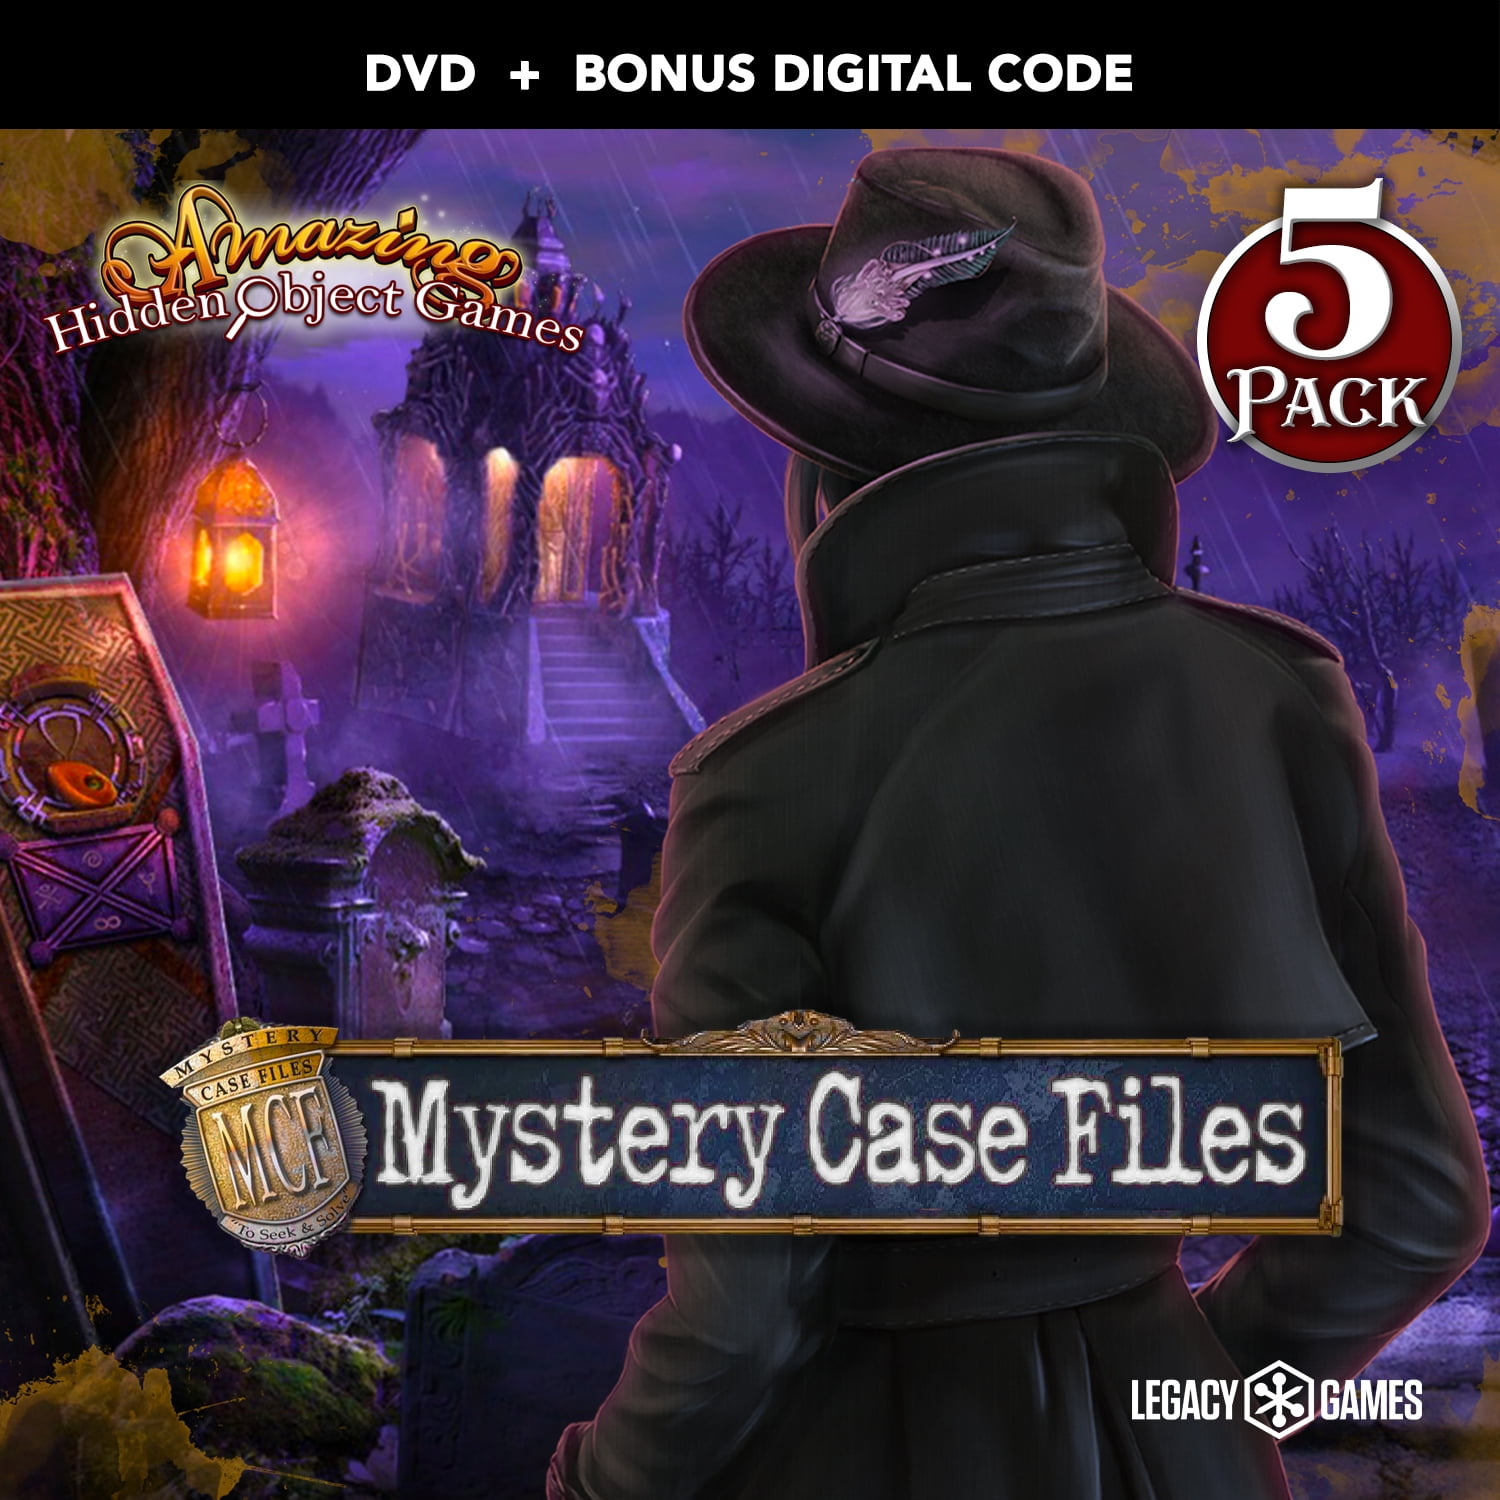  Legacy Games Amazing Hidden Object Games for PC: Delightful  Ventures (5 Game Pack) - PC DVD with Digital Download Codes : Video Games